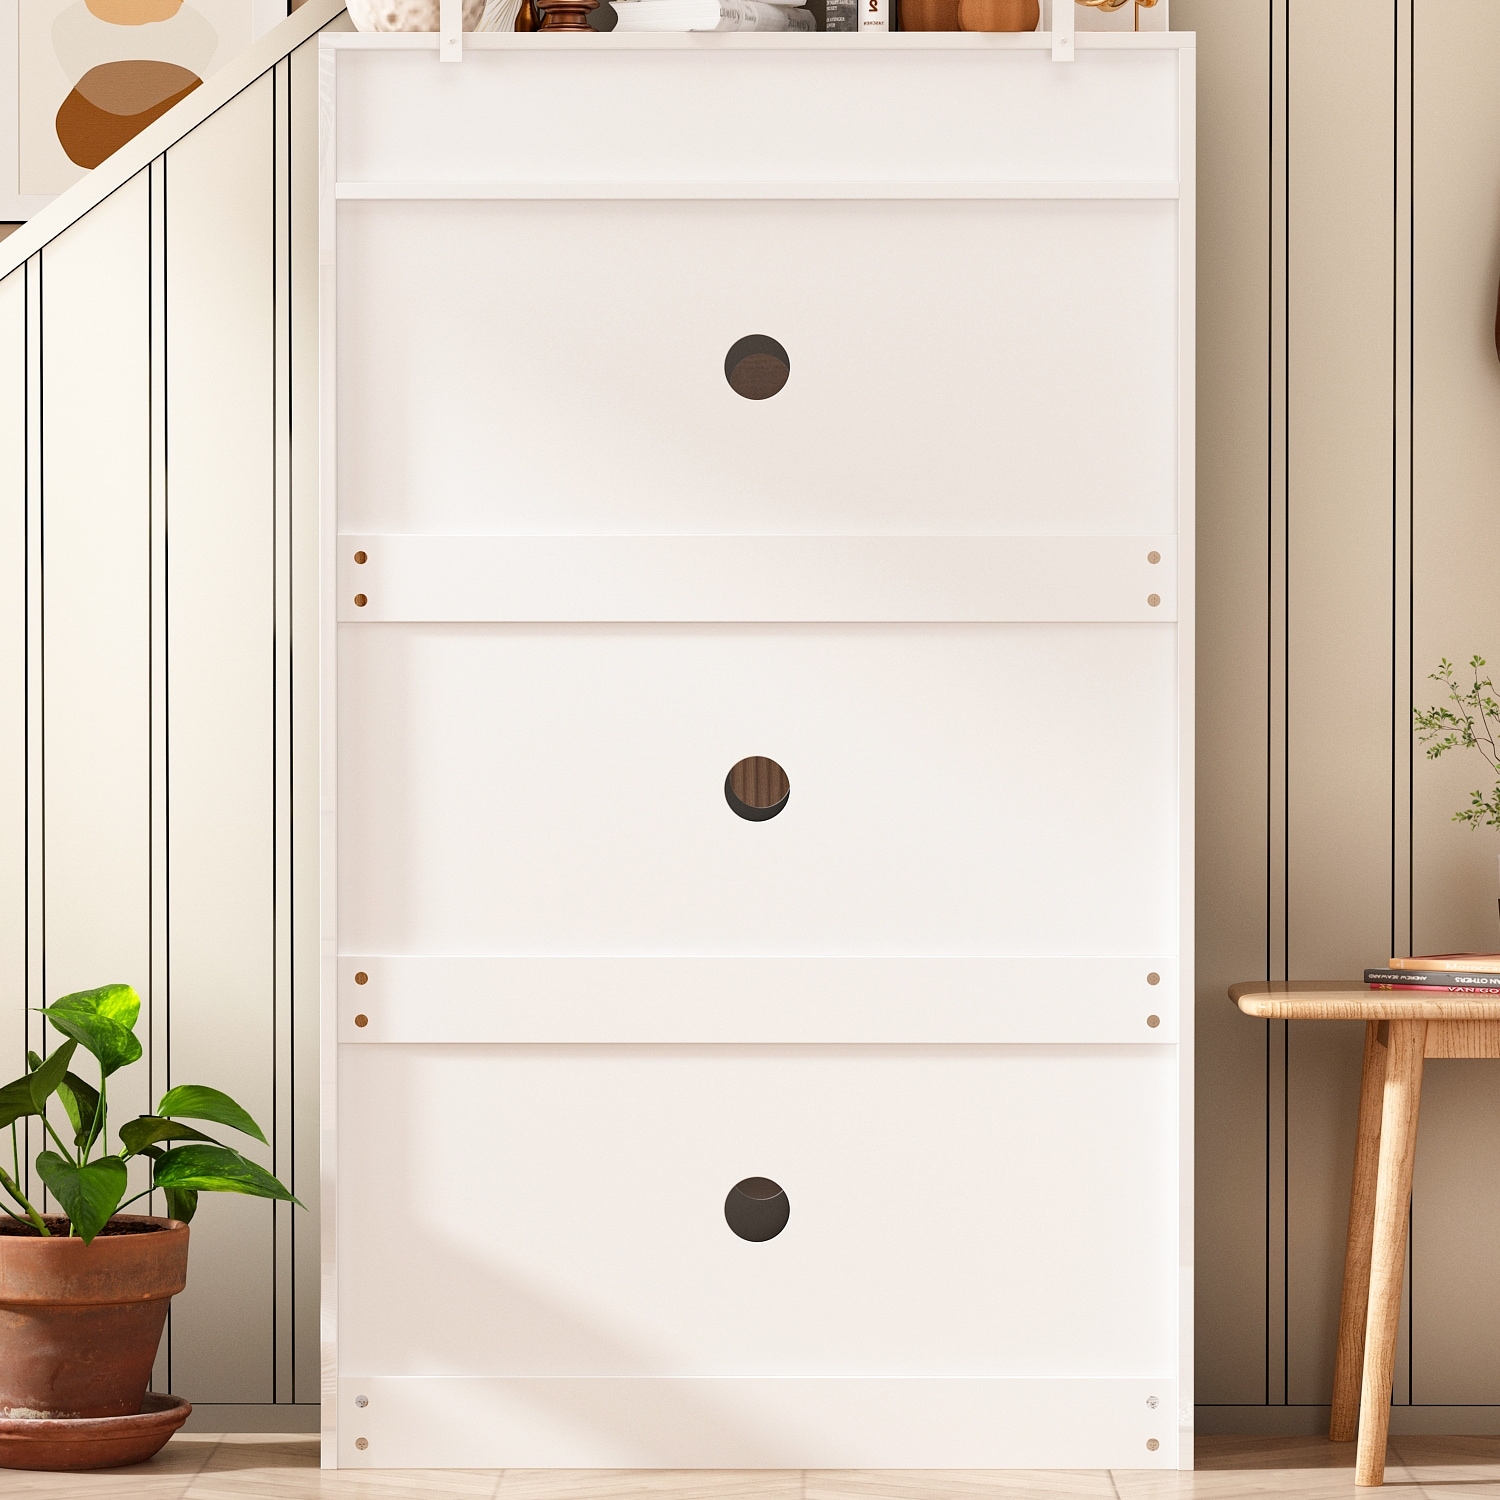 https://ak1.ostkcdn.com/images/products/is/images/direct/931563a393ebe31dfd33e2821cfcb2aff8a6c61e/Modern-Shoe-Storage-Cabinet-with-5-Drawer-Shoe-Rack-Storage-Organizer.jpg